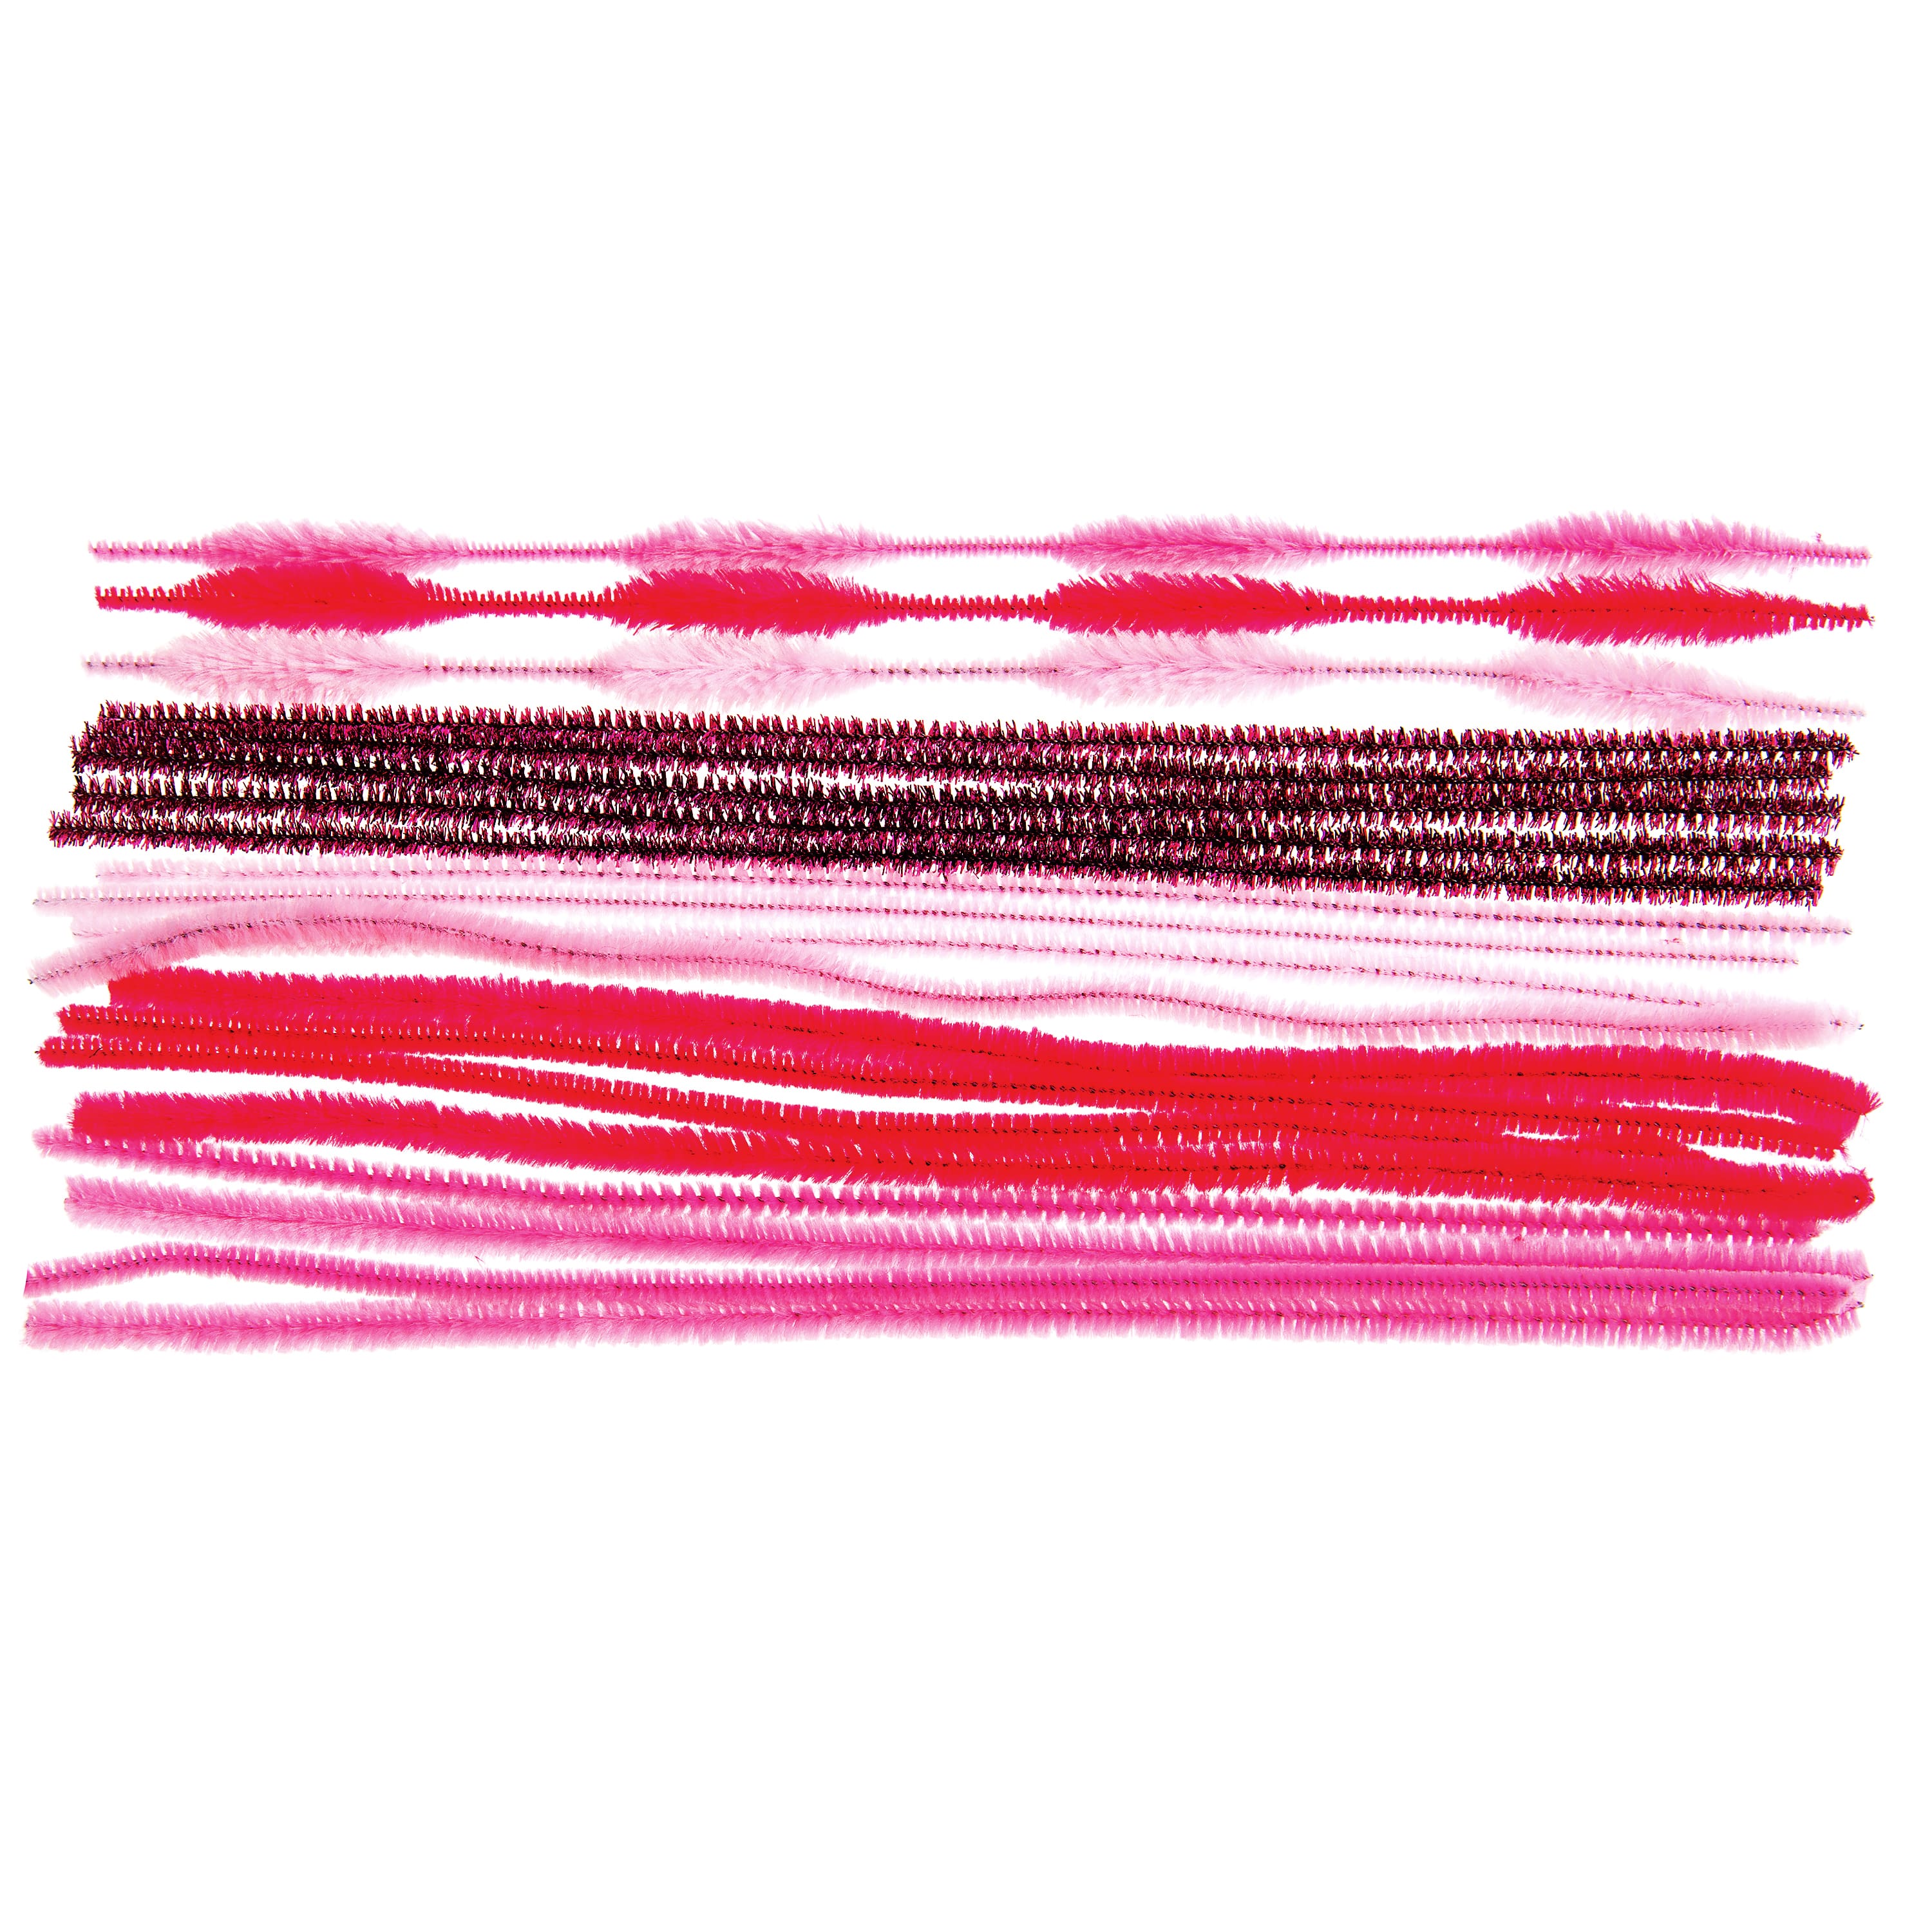 Primary Mix Wave Chenille Pipe Cleaners, 25ct. by Creatology™